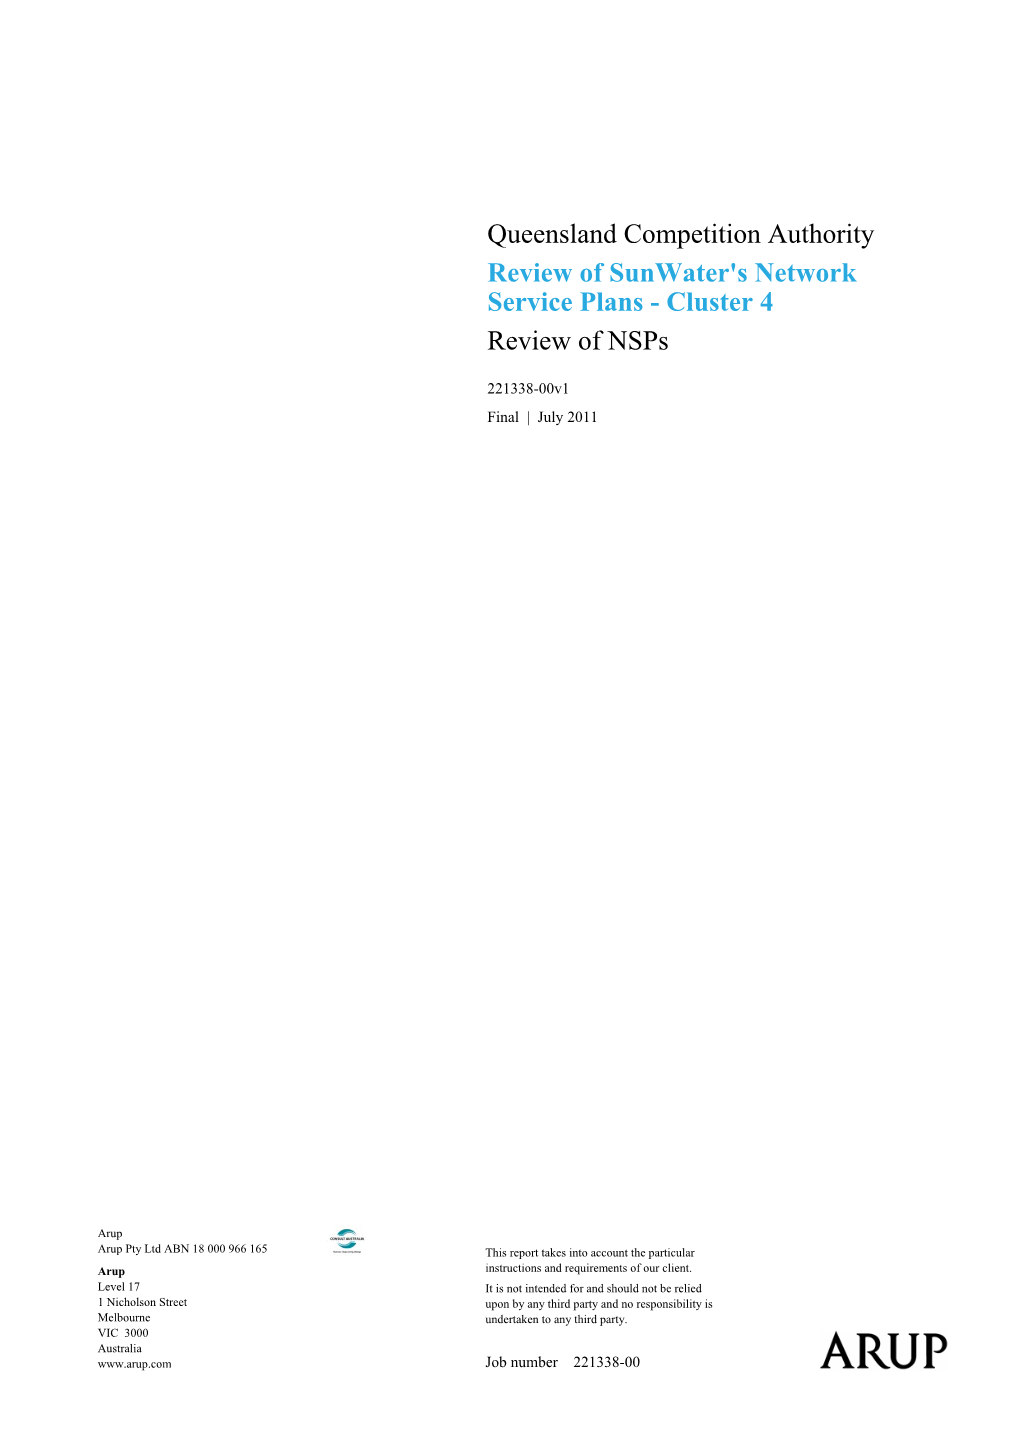 Queensland Competition Authority Review of Sunwater's Network Service Plans - Cluster 4 Review of Nsps